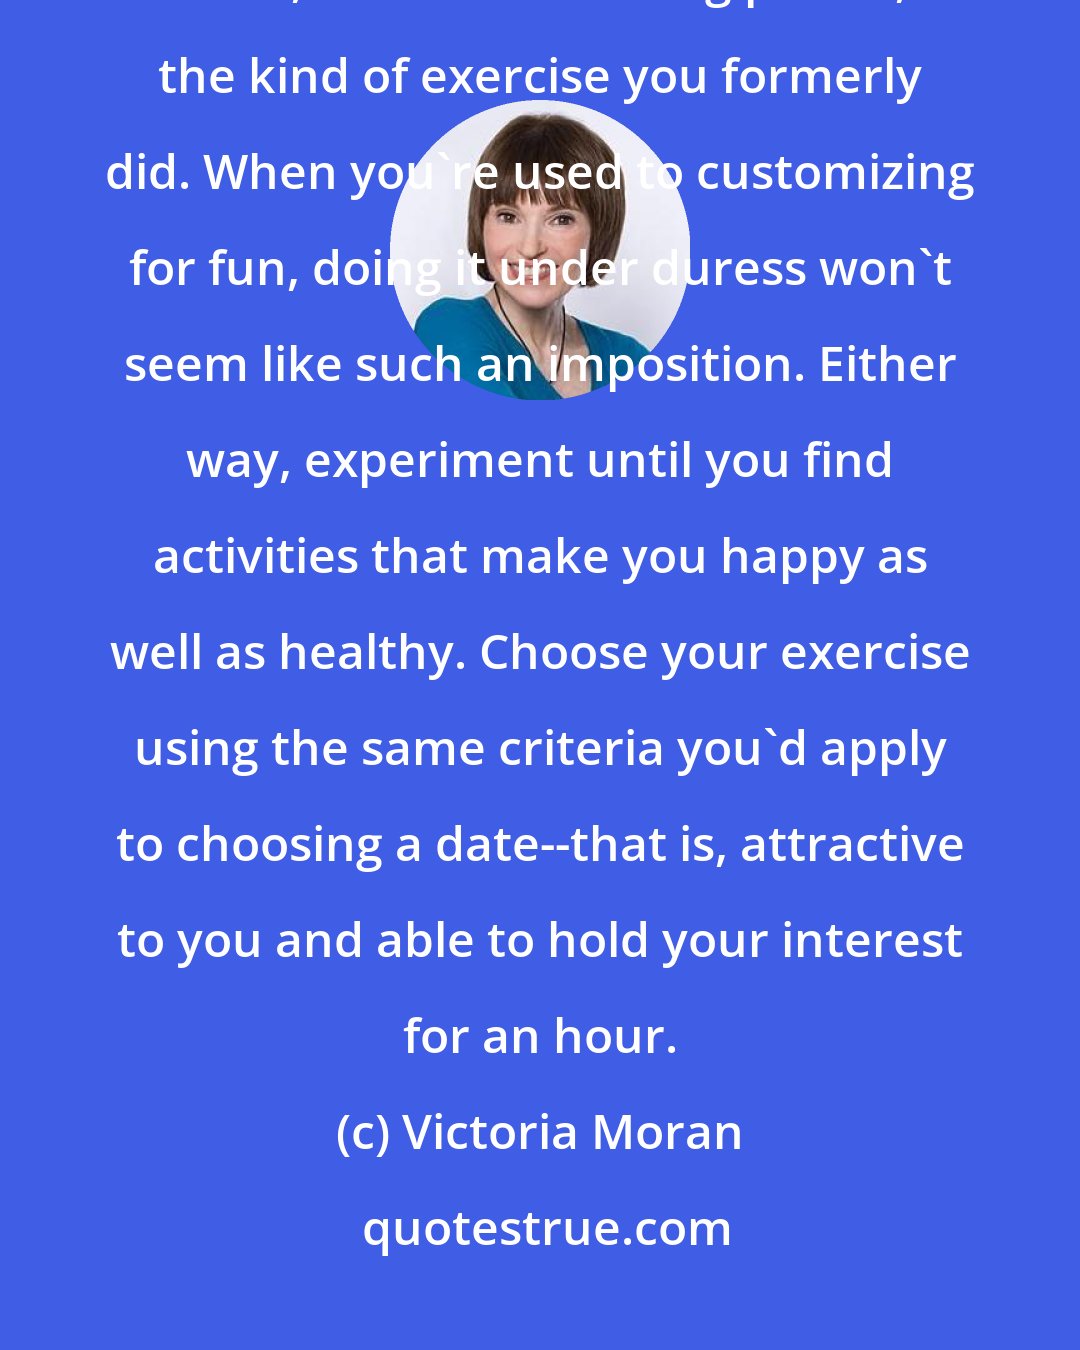 Victoria Moran: Sometimes customizing is necessary because of an injury or the inability to do, for a short or long period, the kind of exercise you formerly did. When you're used to customizing for fun, doing it under duress won't seem like such an imposition. Either way, experiment until you find activities that make you happy as well as healthy. Choose your exercise using the same criteria you'd apply to choosing a date--that is, attractive to you and able to hold your interest for an hour.